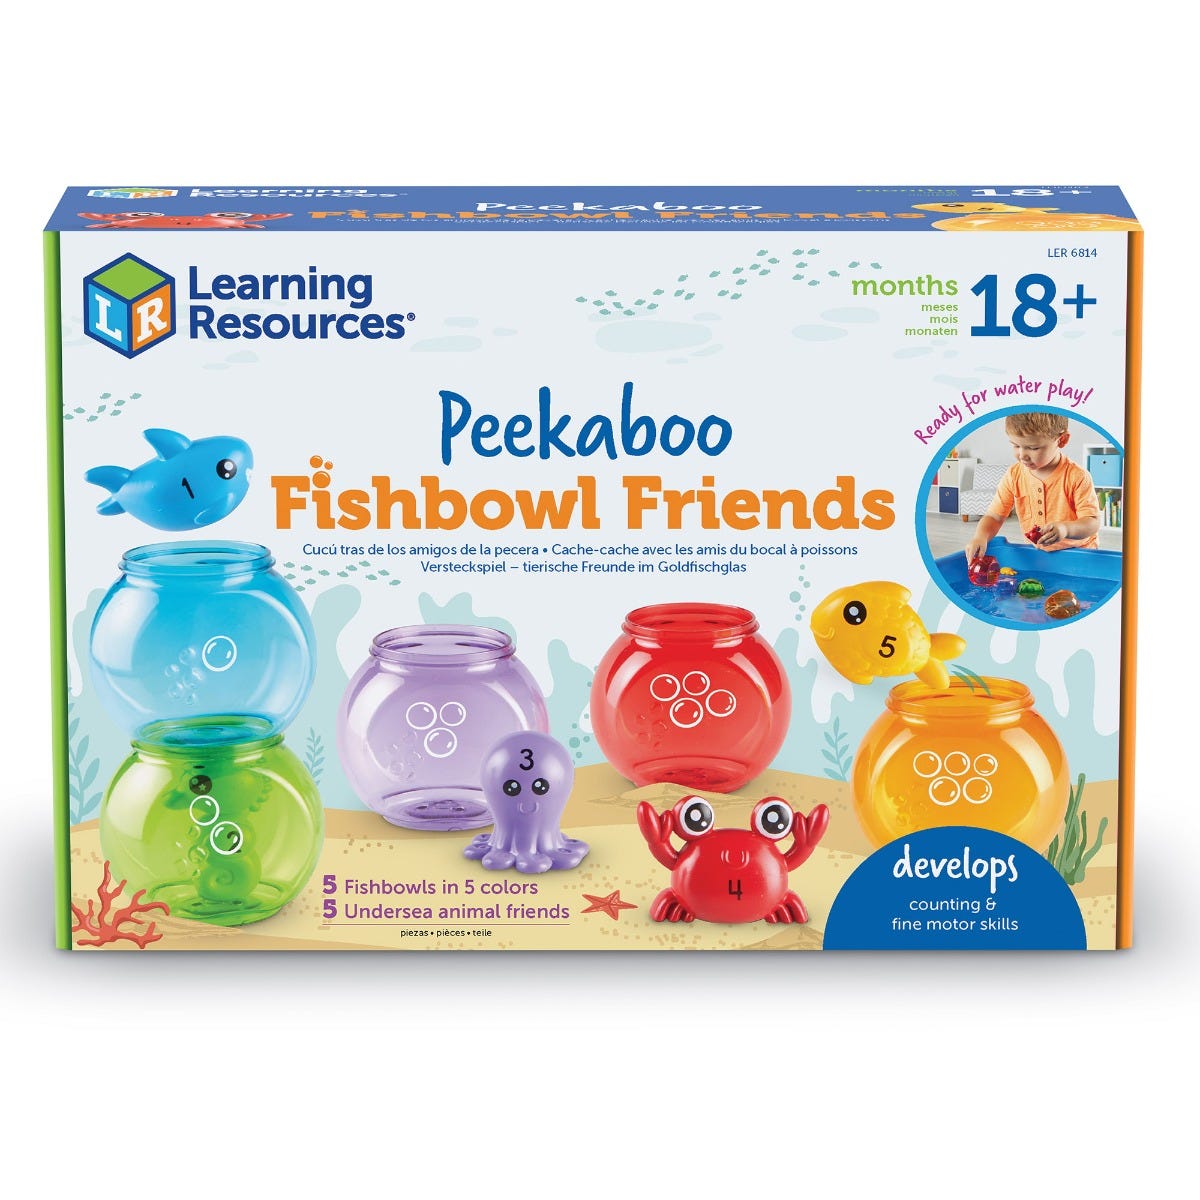 Peekaboo Fishbowl Friends, Introducing the Peekaboo Fishbowl Friends, a set of toddler toys designed to promote early learning in a fun and interactive way. With these friendly sea creatures, little ones can engage in activities that enhance their counting, colors, matching, and fine motor skills.Each Peekaboo Fishbowl Friends set includes five translucent fishbowls, each coming in a different vibrant color. These visually appealing fishbowls immediately catch the attention of young minds. Inside each bowl,